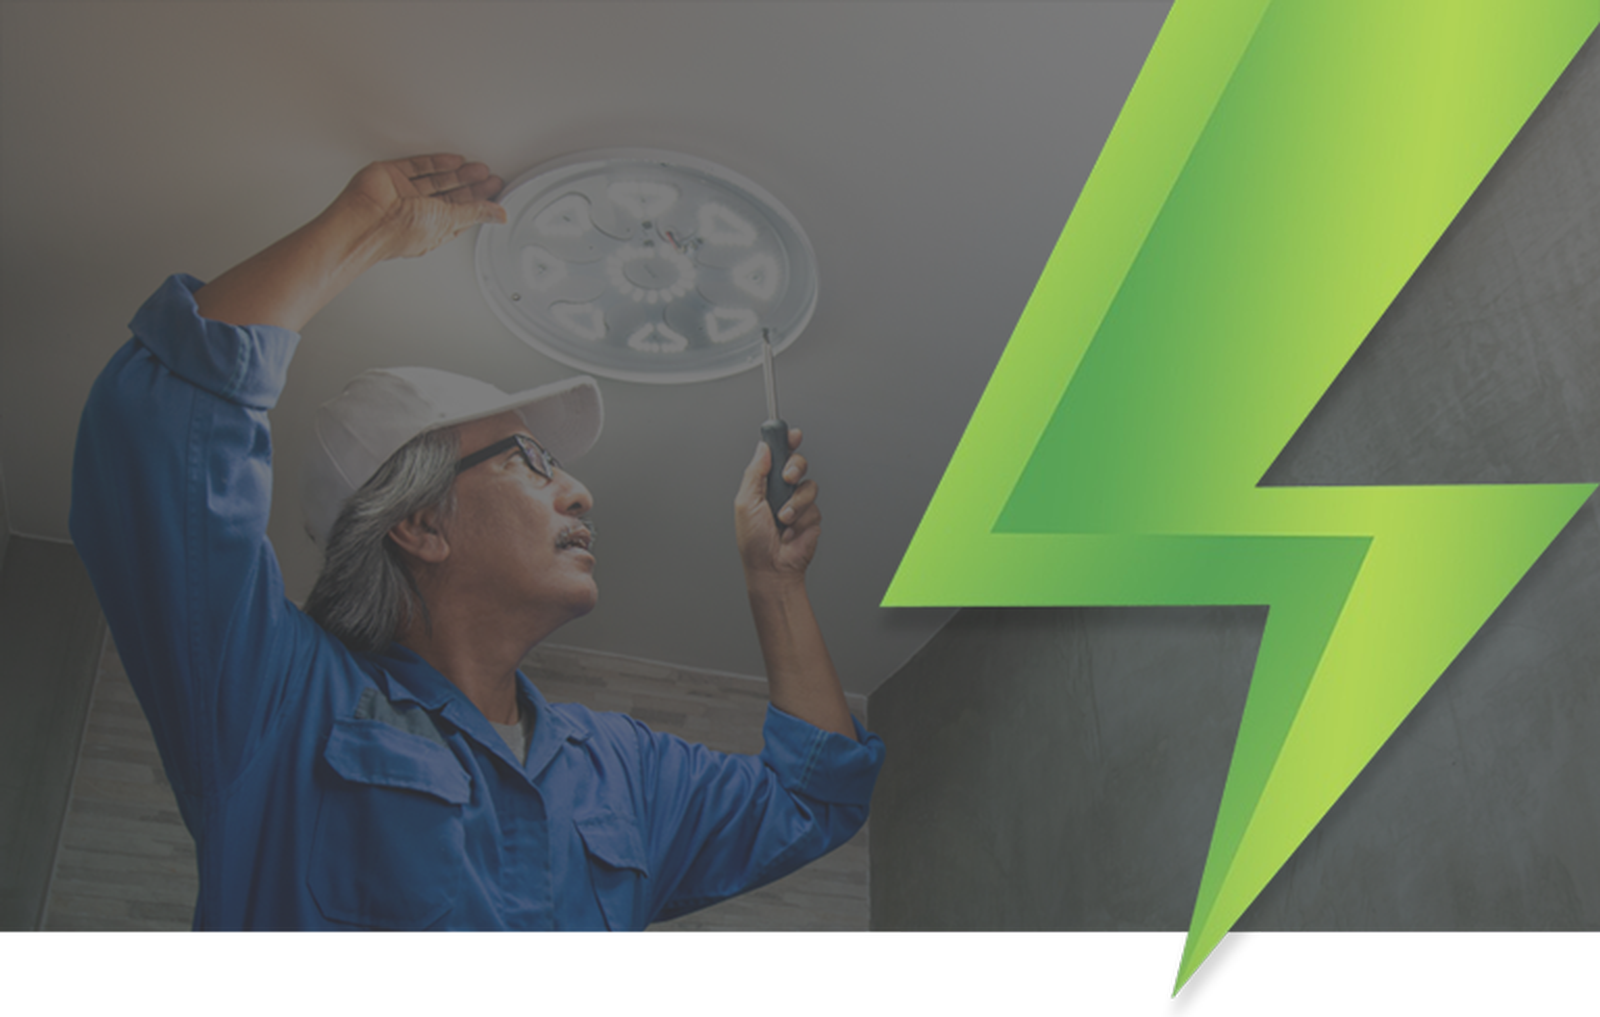 Residential, Commercial Electrician at Delray Electric Ltd. offers Electrical Services across Legal, Alberta